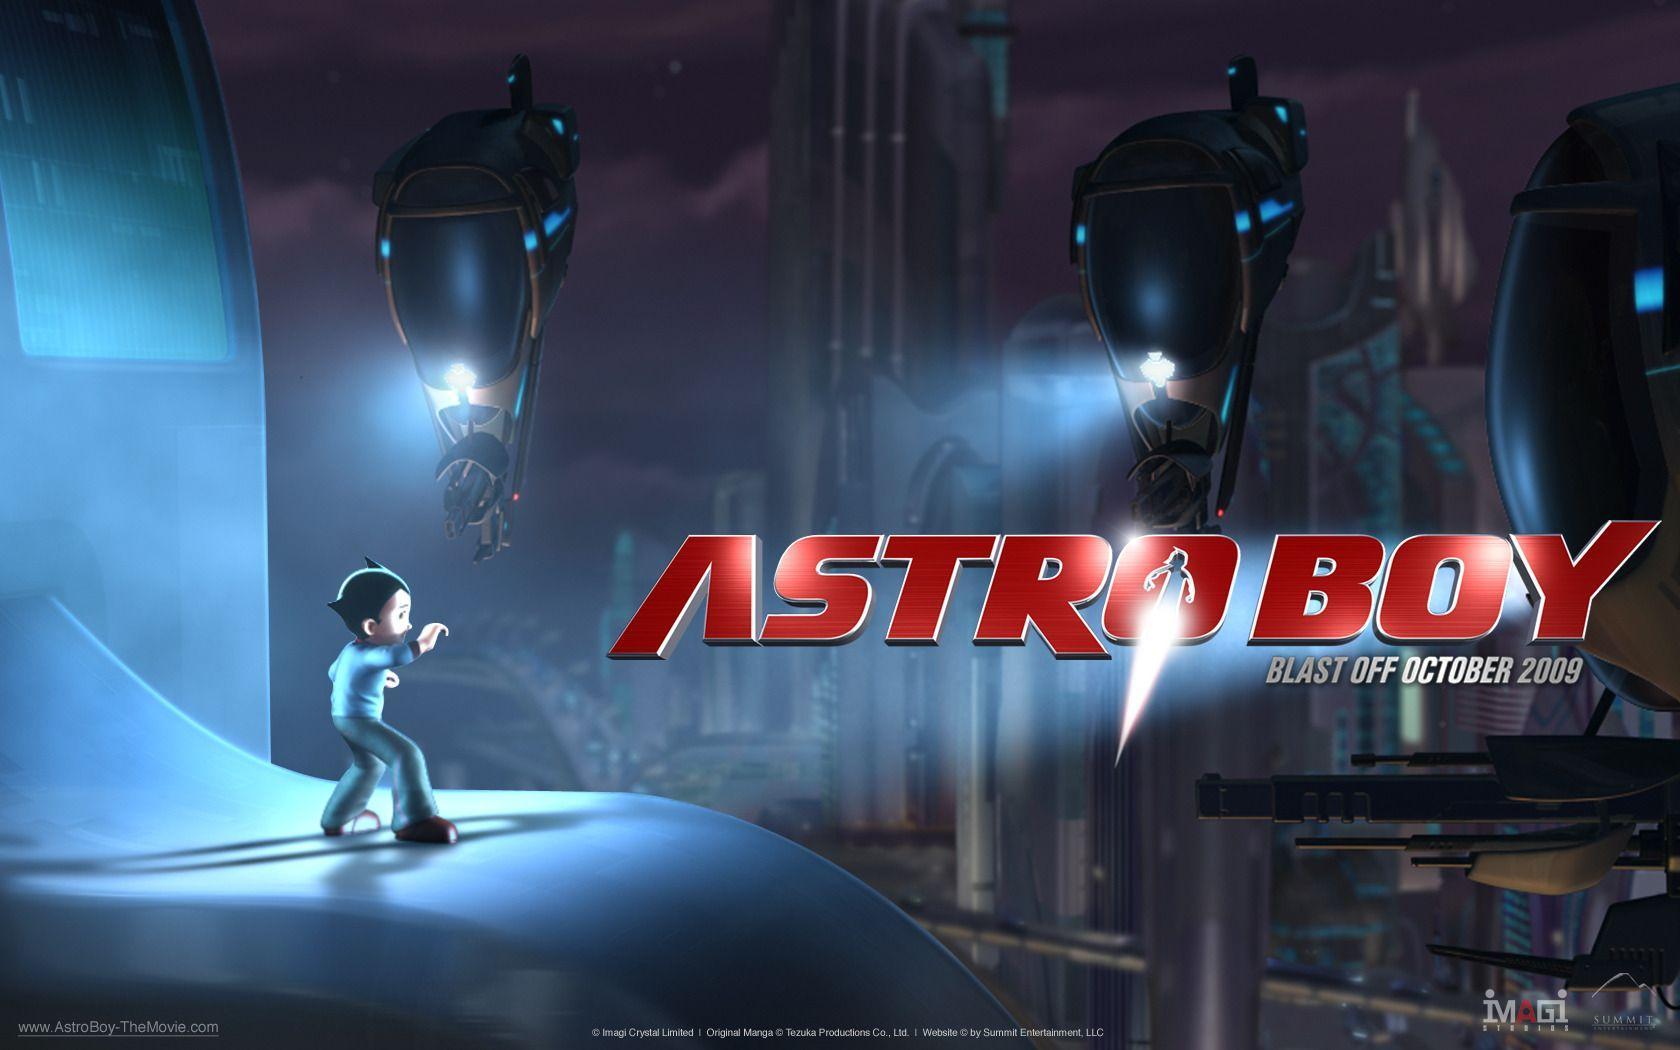 ASTRO BOY Photo Gallery: Posters, Image, Wallpaper